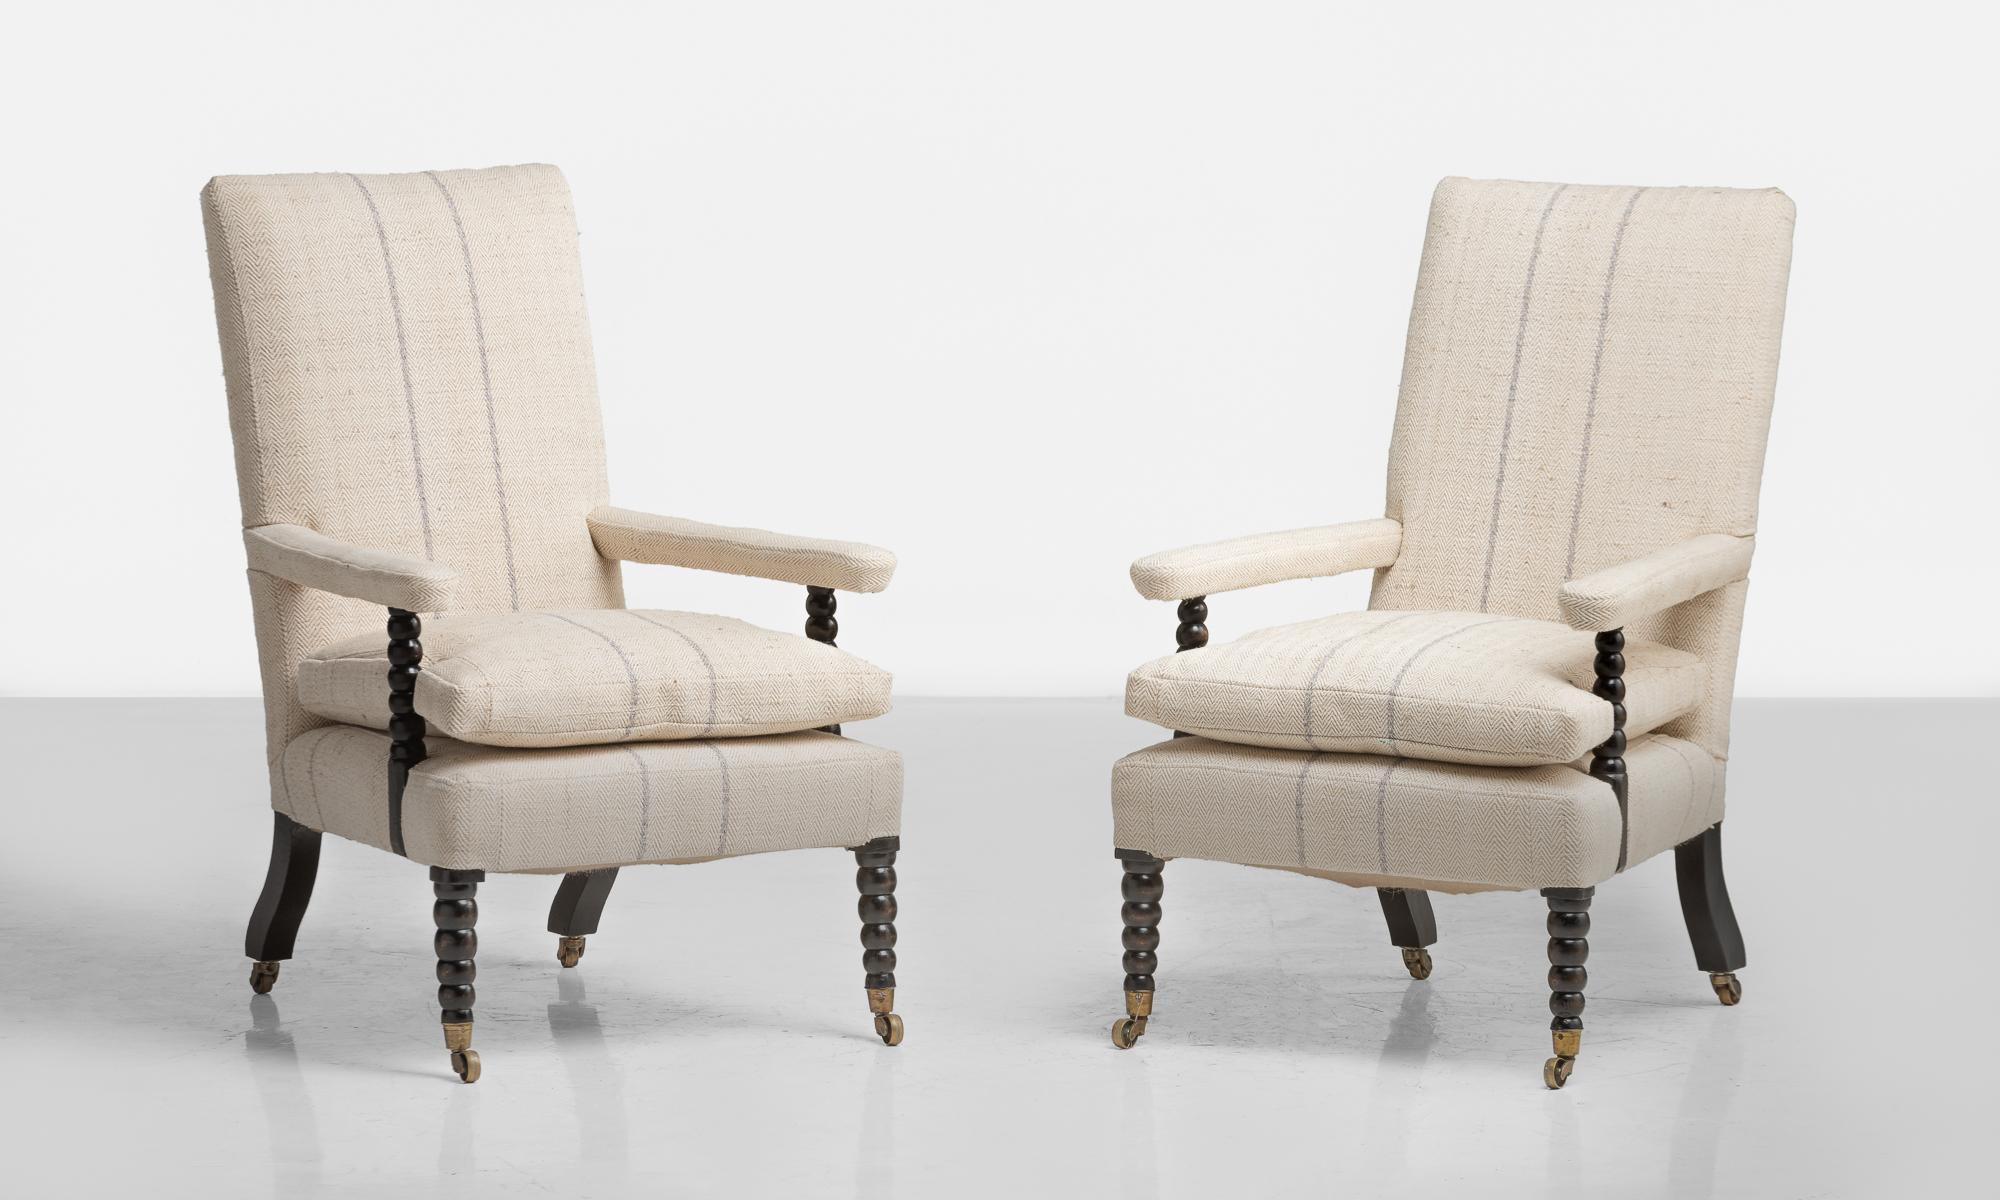 Pair of Regency armchairs, circa 1820

Newly upholstered in a cotton herringbone with hand-turned supports and brass hardware.